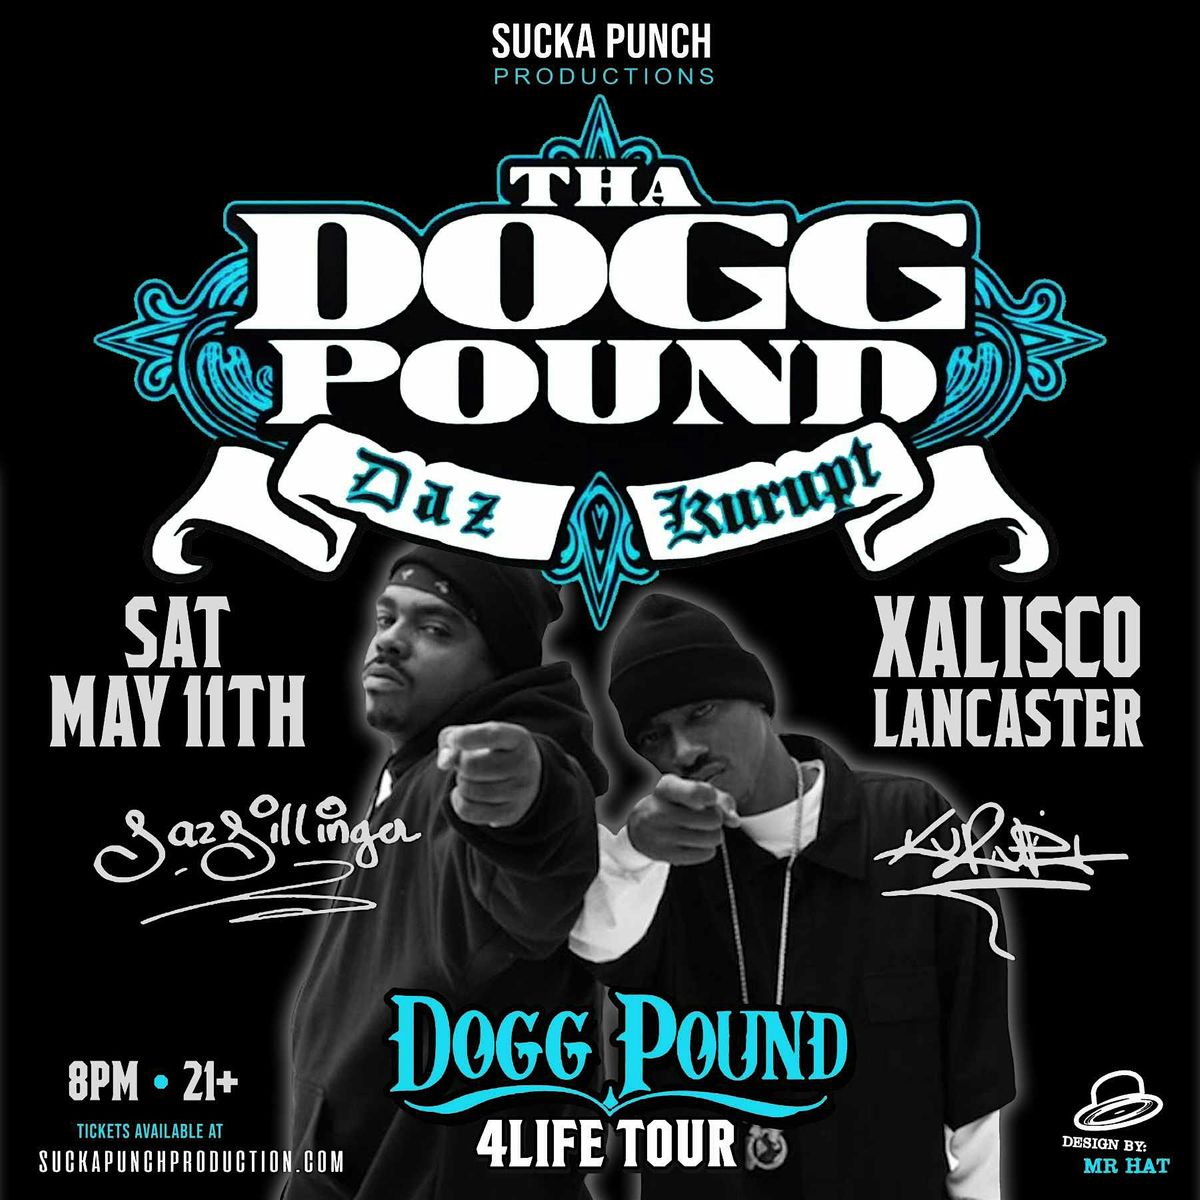 THA DOG POUND DAZ & KARUPT LIVE IN CONCERT AT XALISCO MAY 11TH